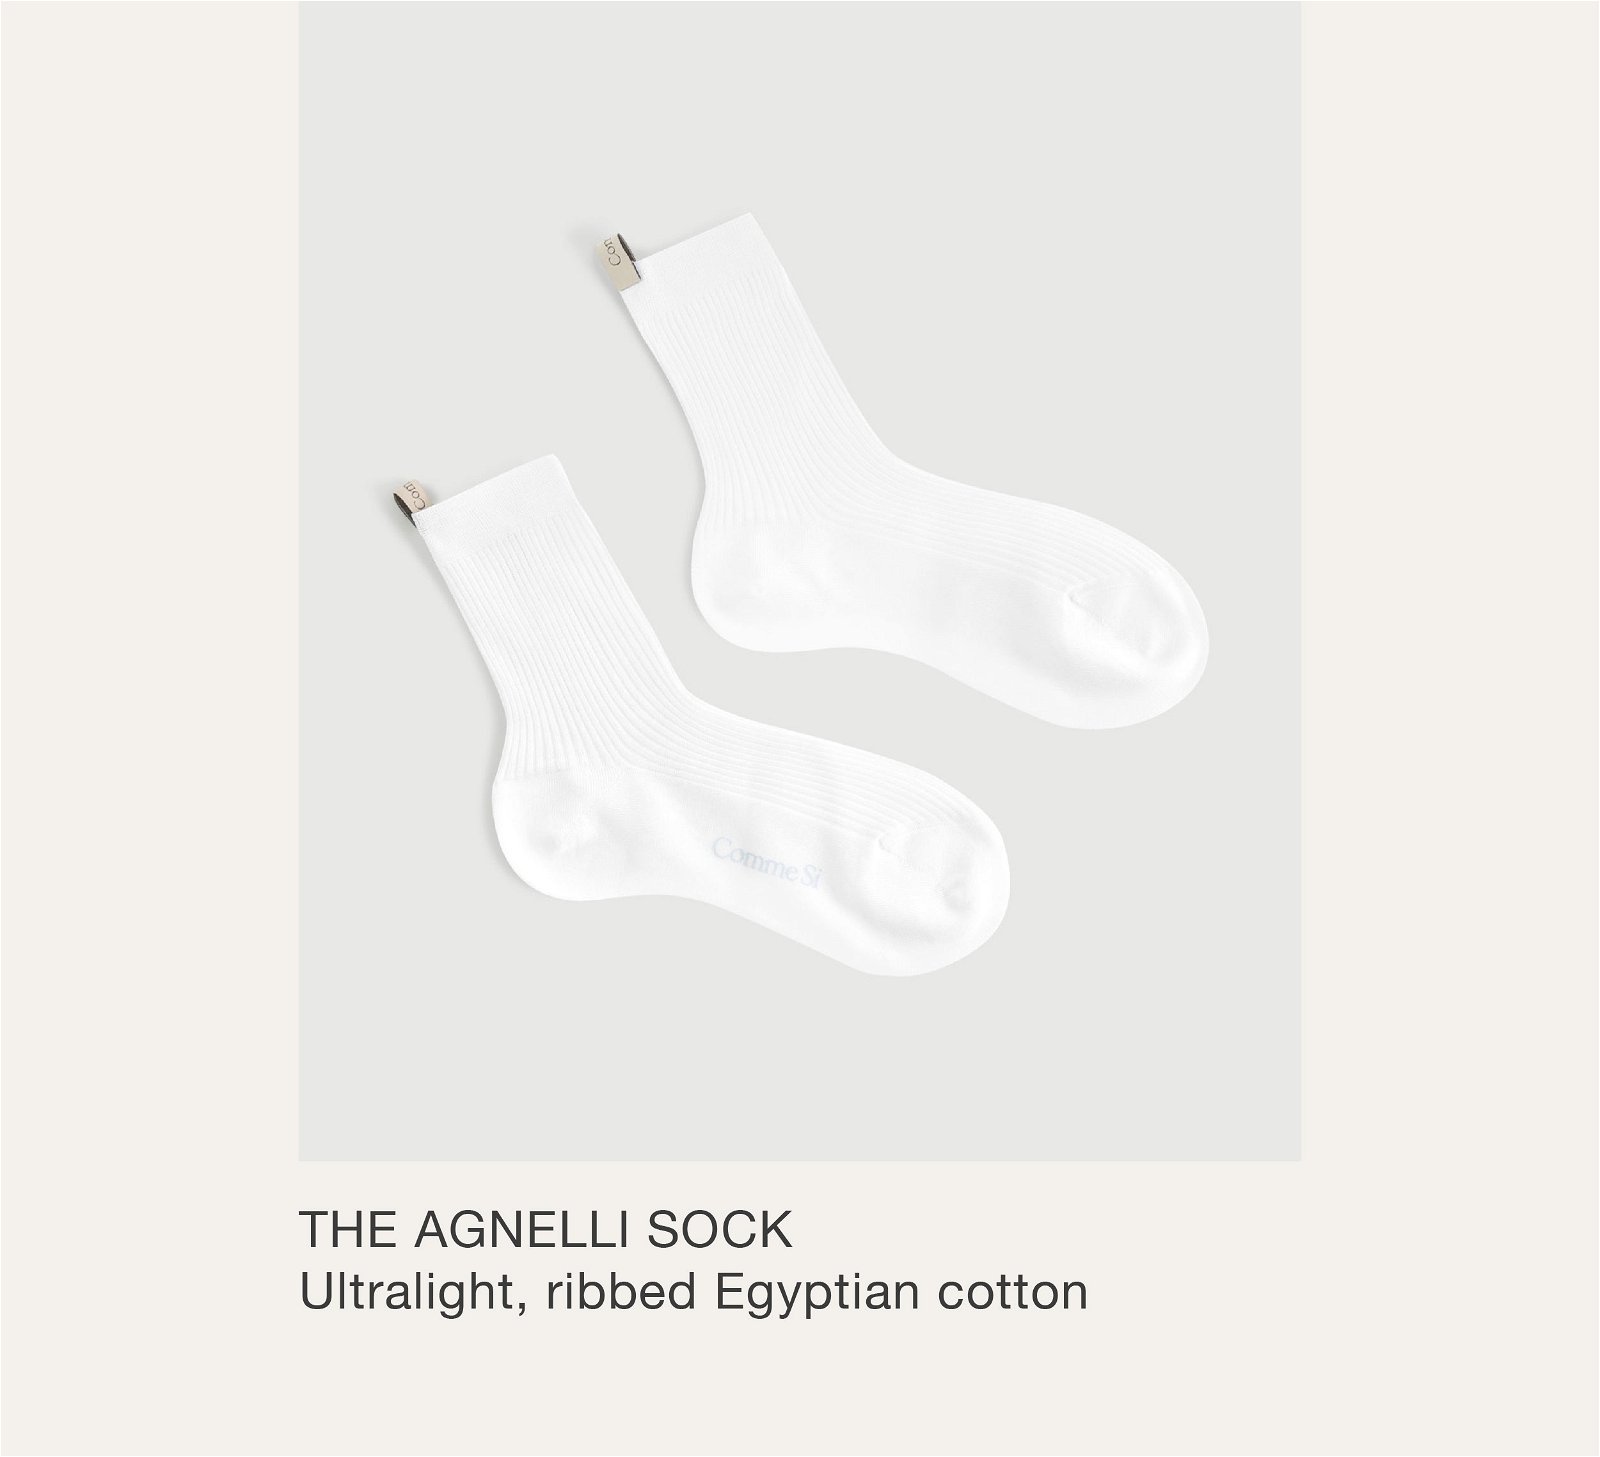 The Agnelli Sock. Ultralight, ribbed Egyptian cotton